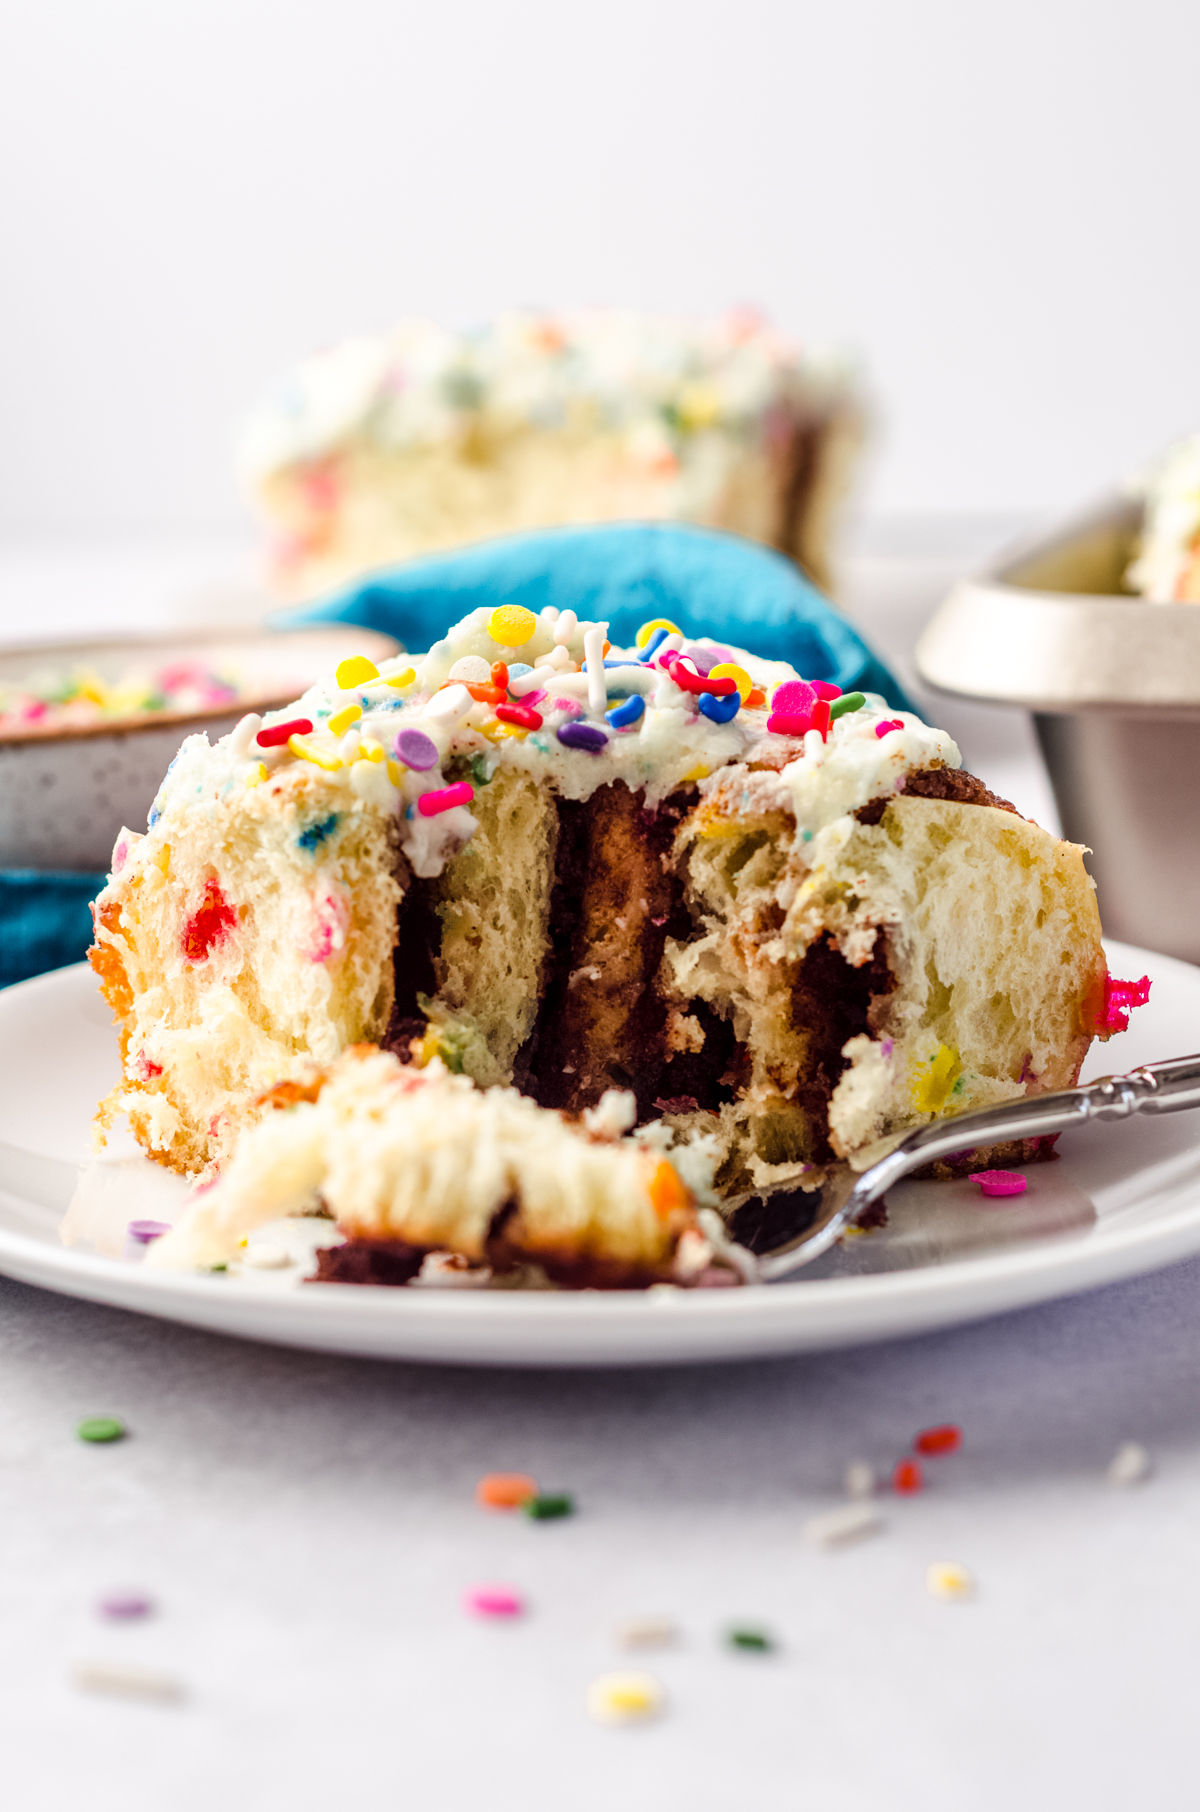 A funfetti cinnamon roll on a plate with a fork holding a bite of the roll.